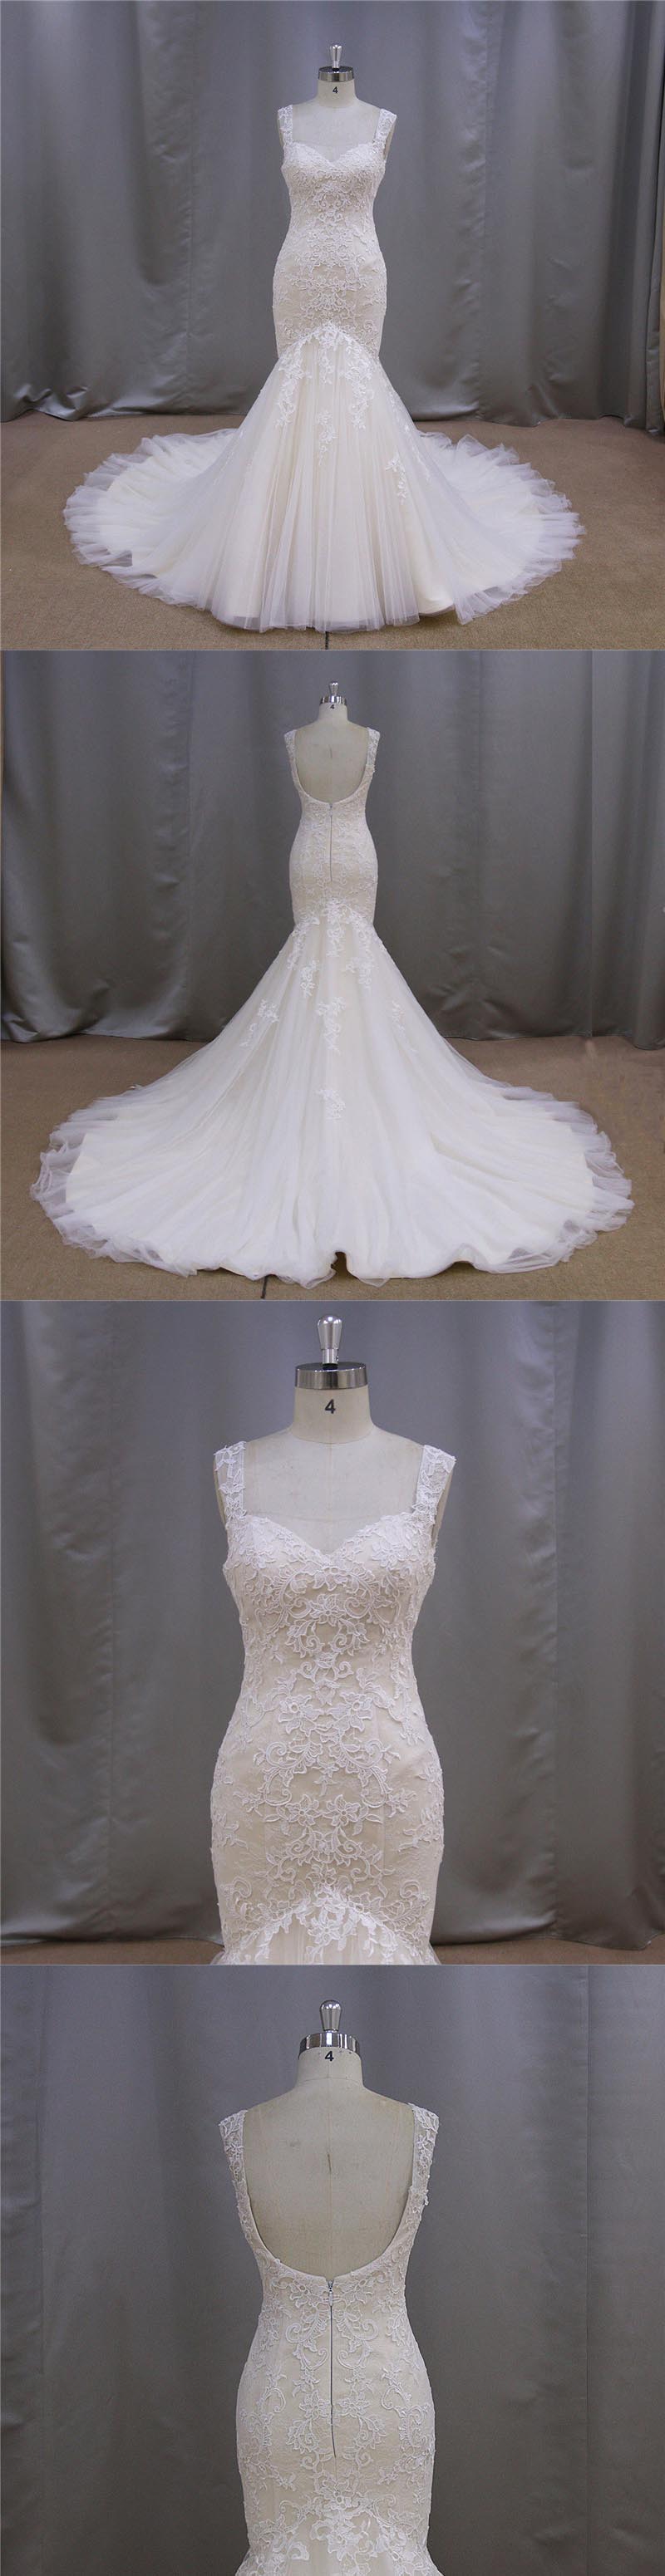 Champagne Good Price New Arrival Wedding Dress